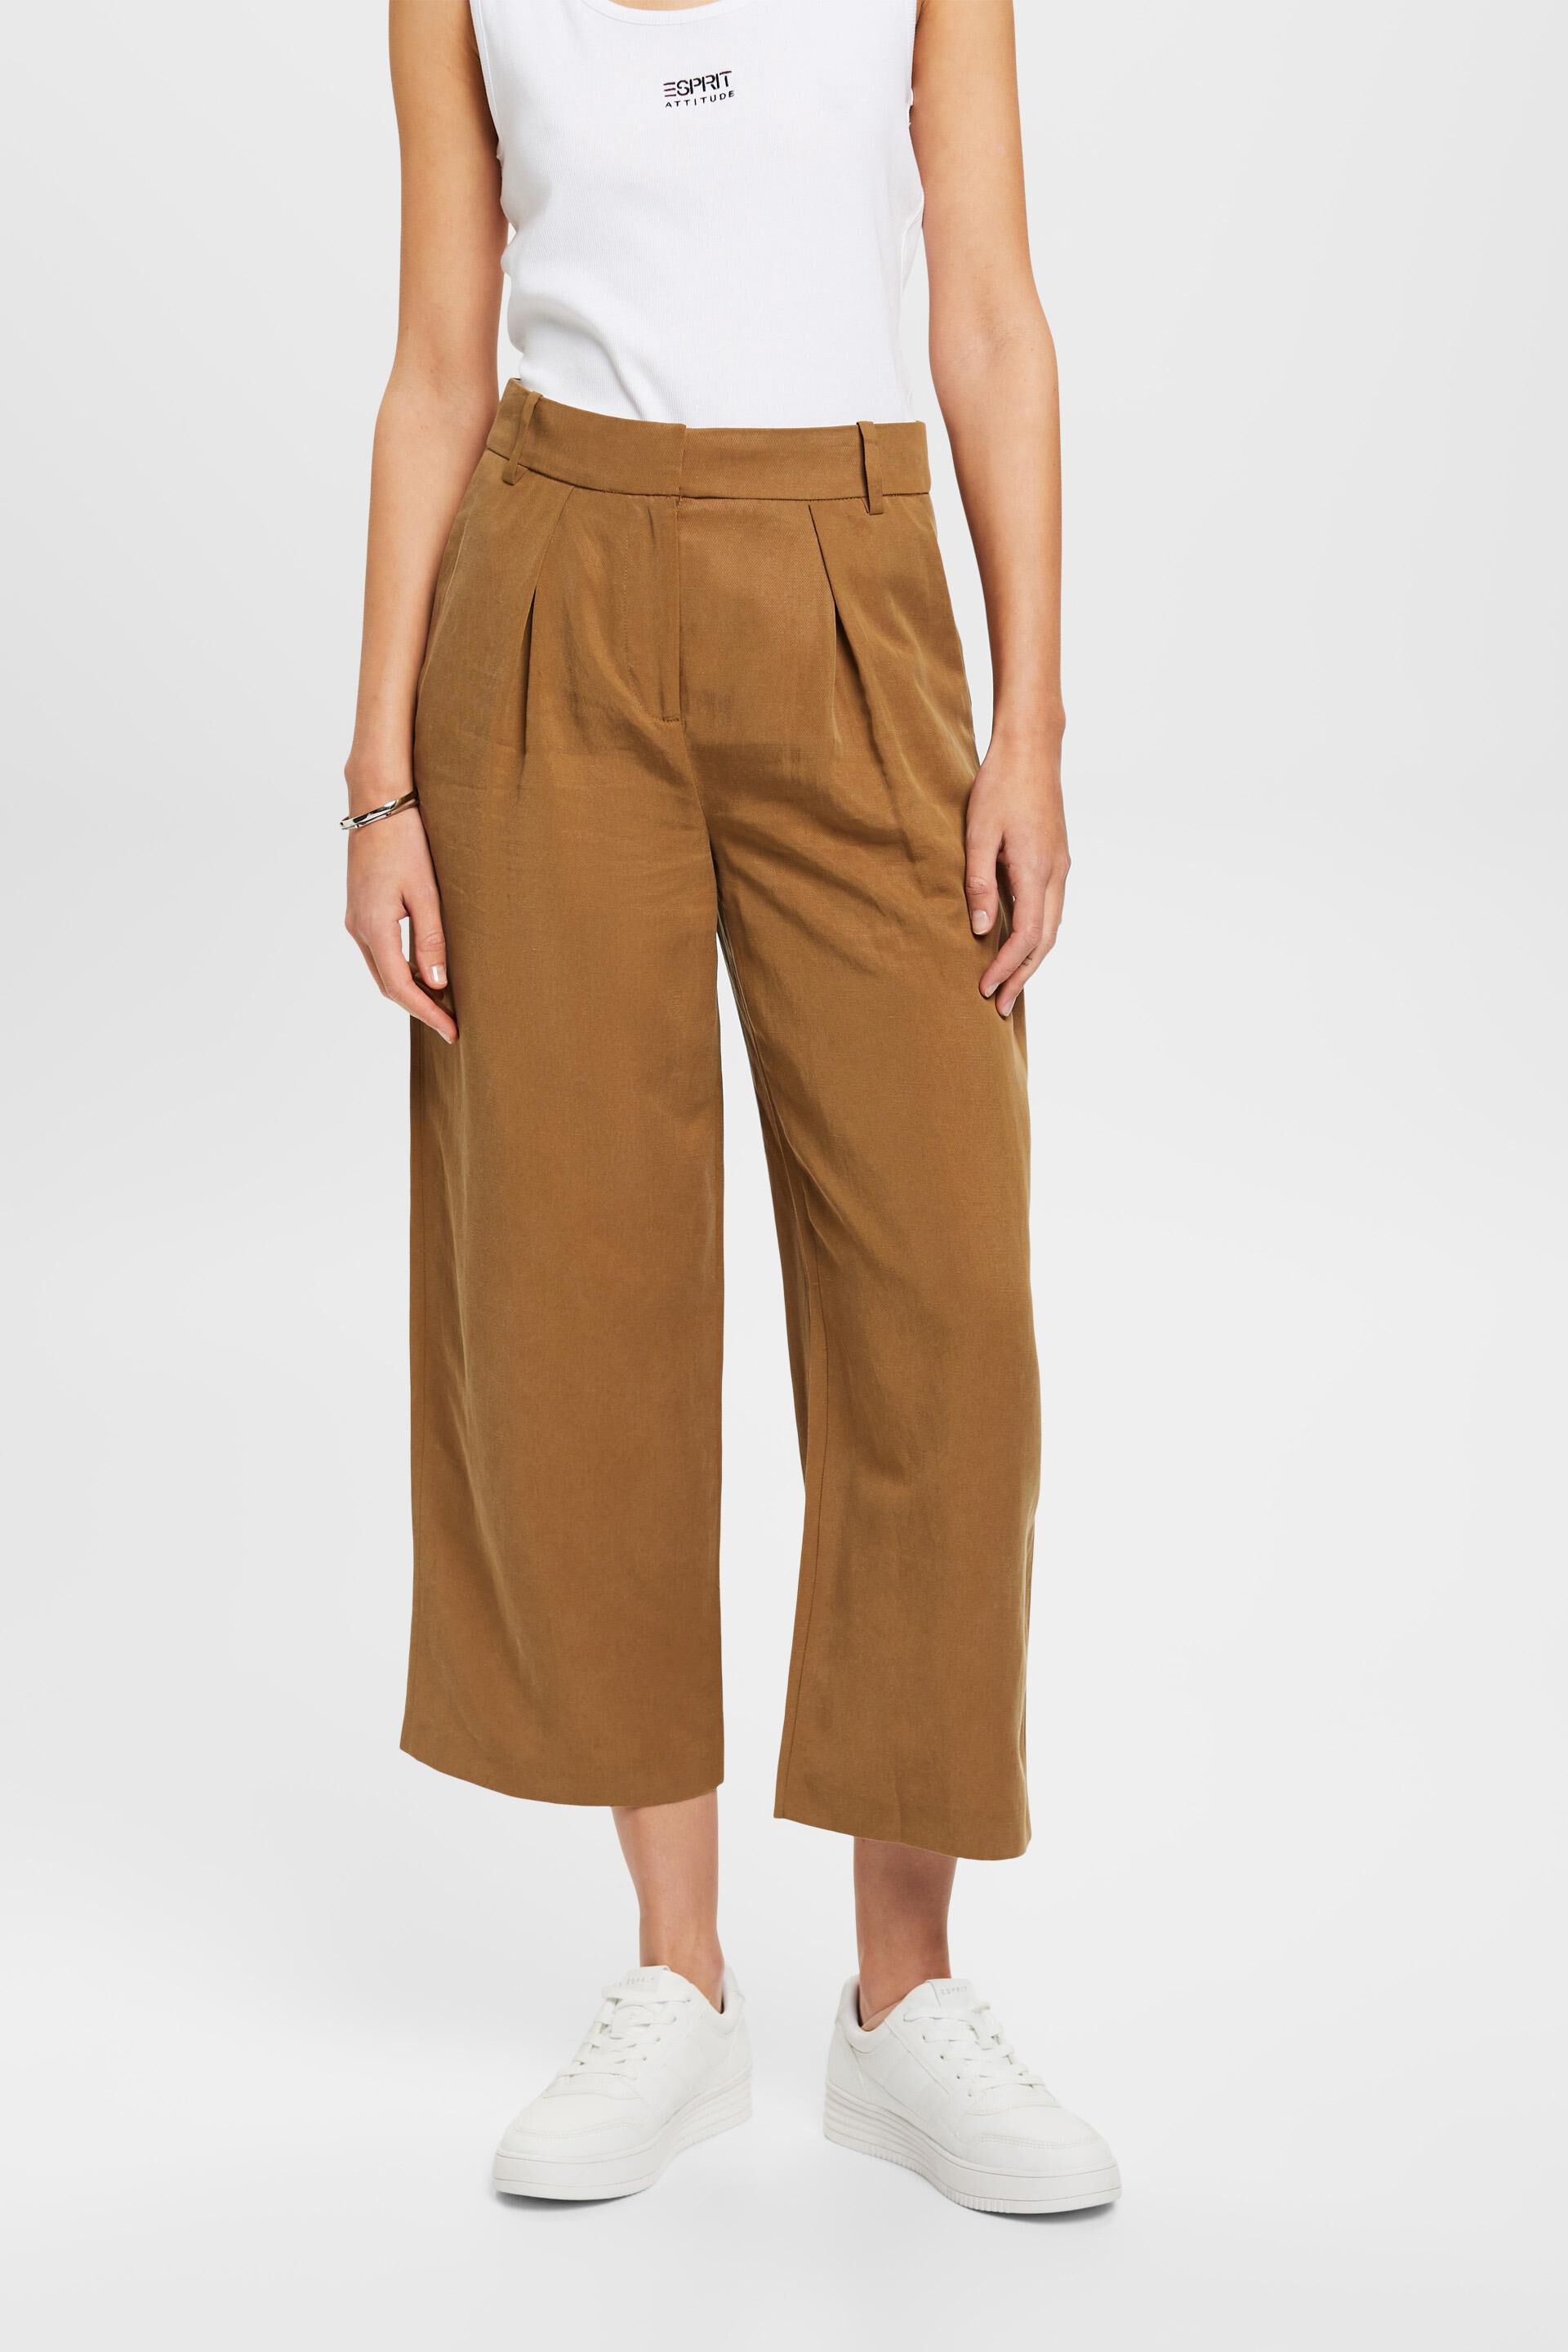 Khaki Ribbed Wide Leg Crop Trousers  New Look